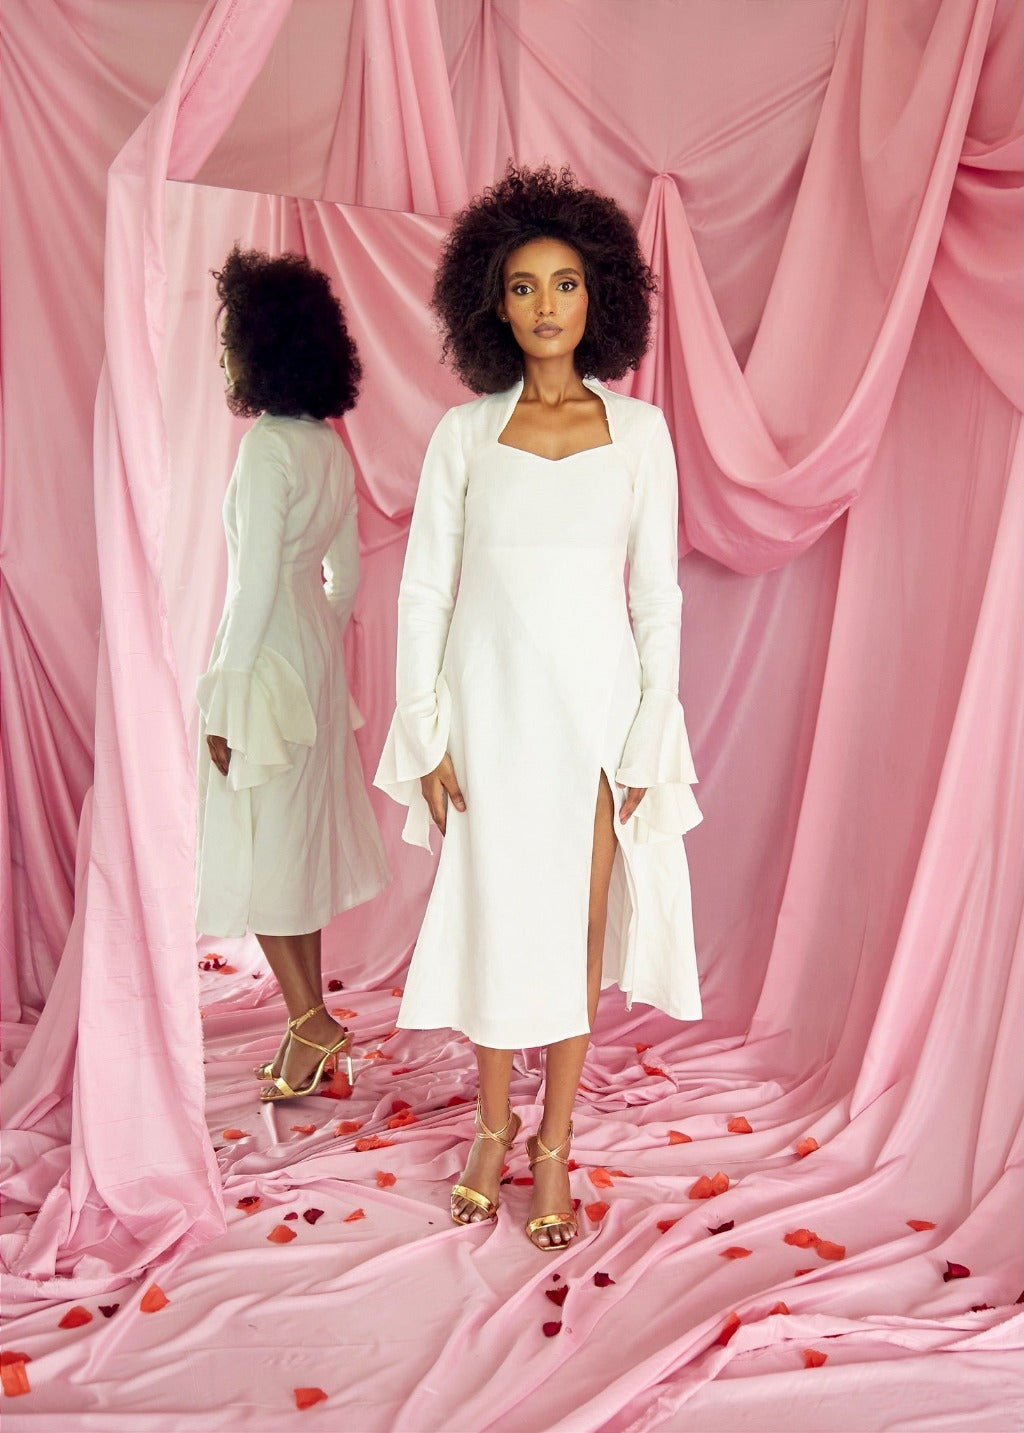 A model wearing a white linen dress with a side slit in a pink setting